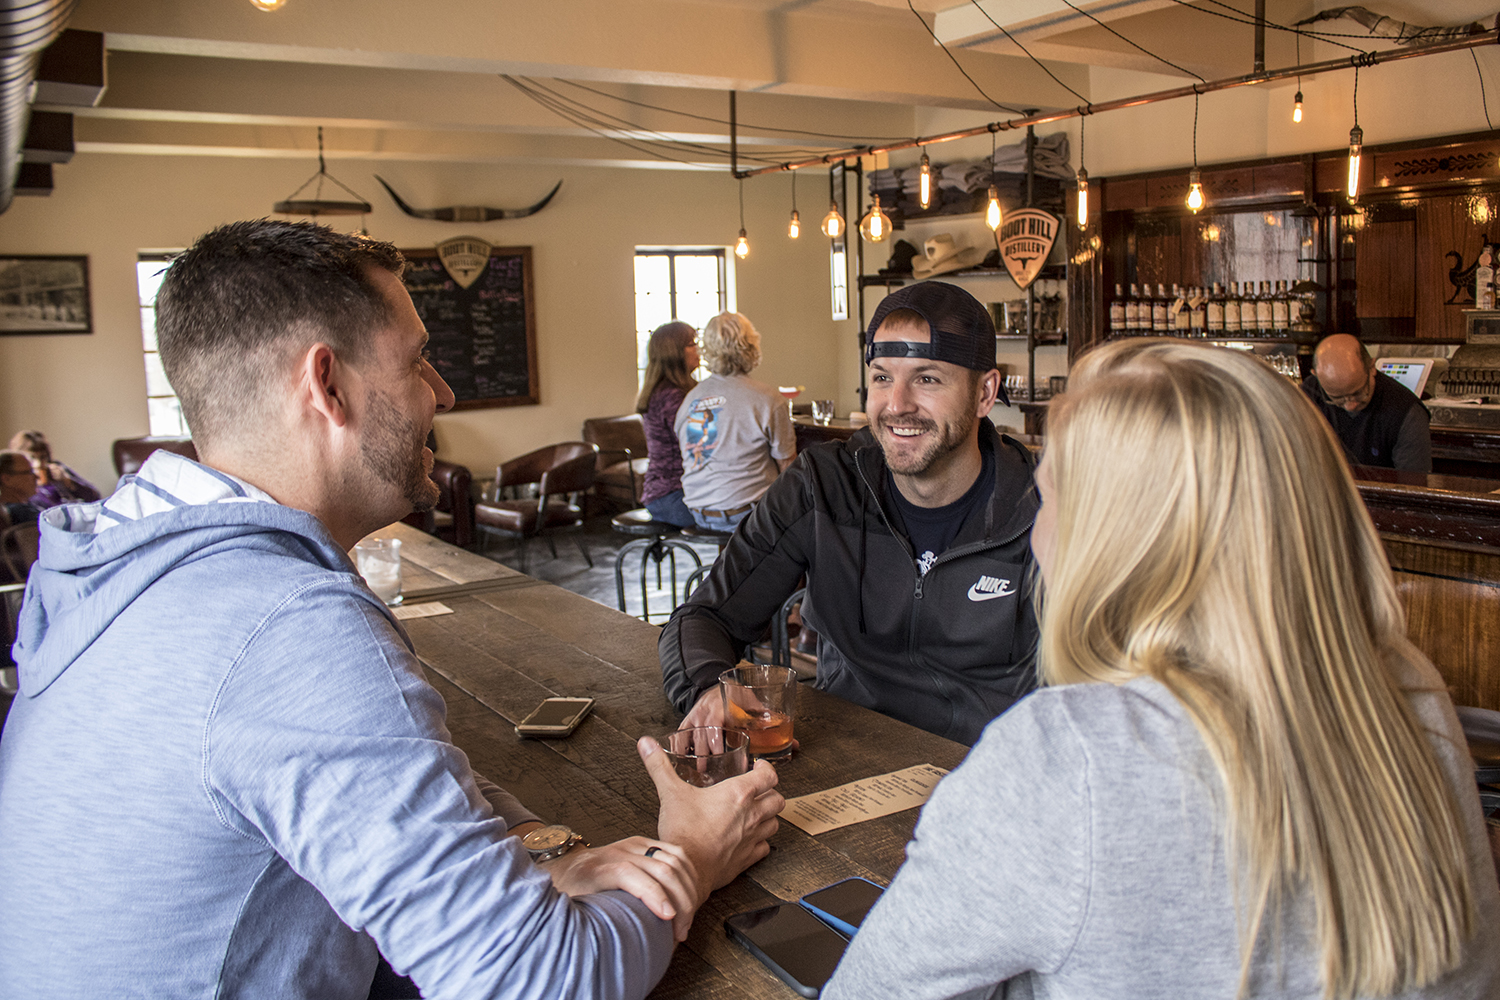 Customers in The Tasting Room at Boot Hill Distillery